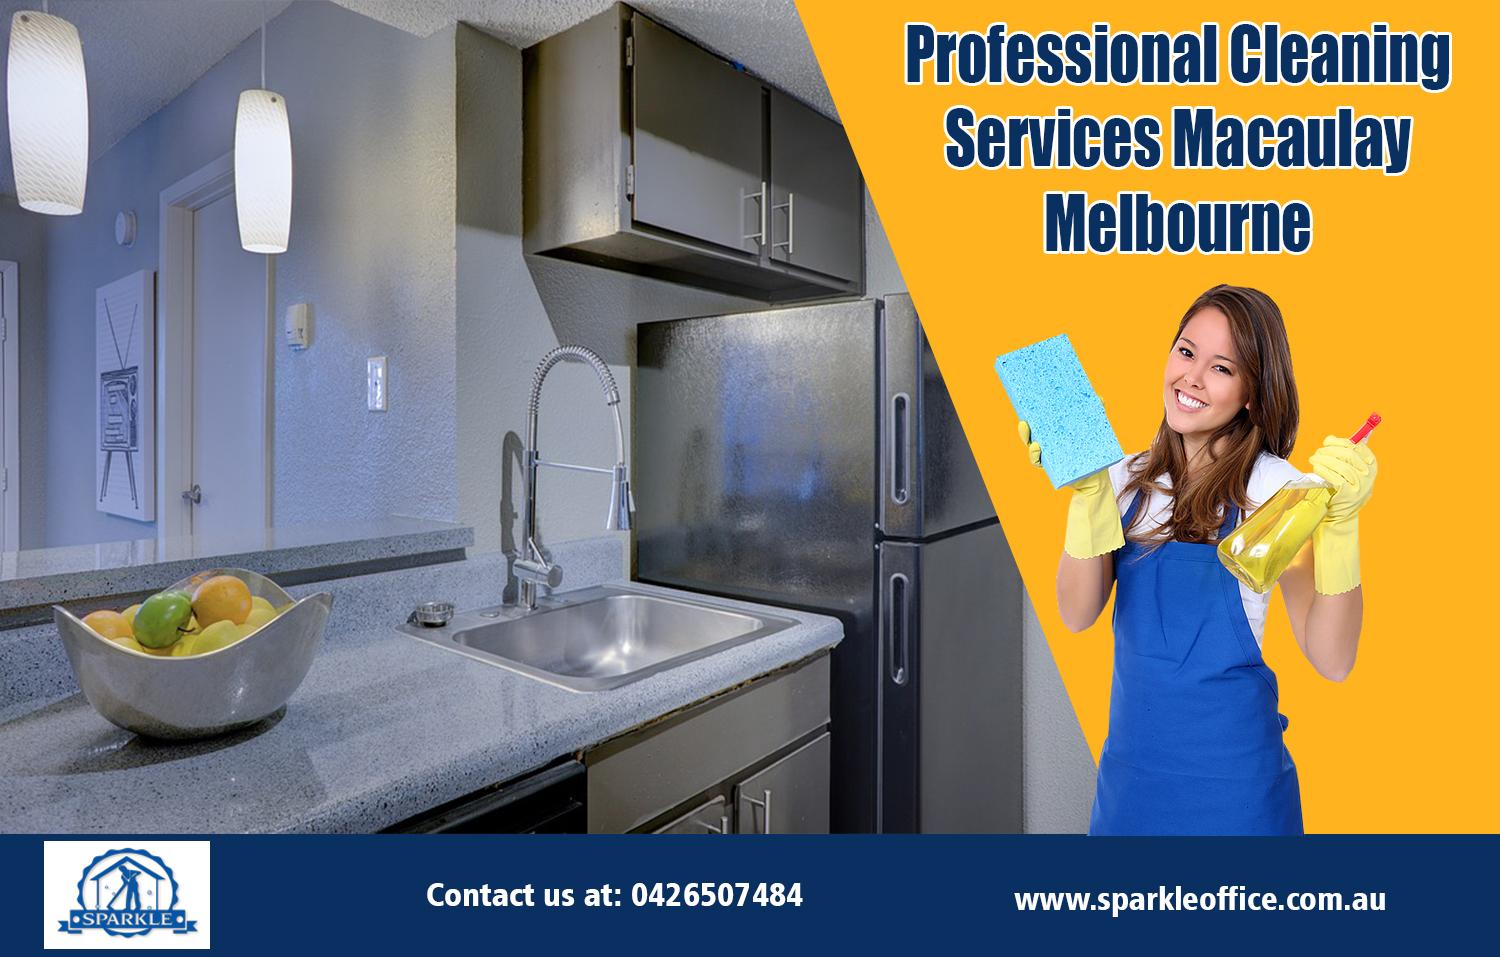 Professional Cleaning Services Macaulay Melbourne